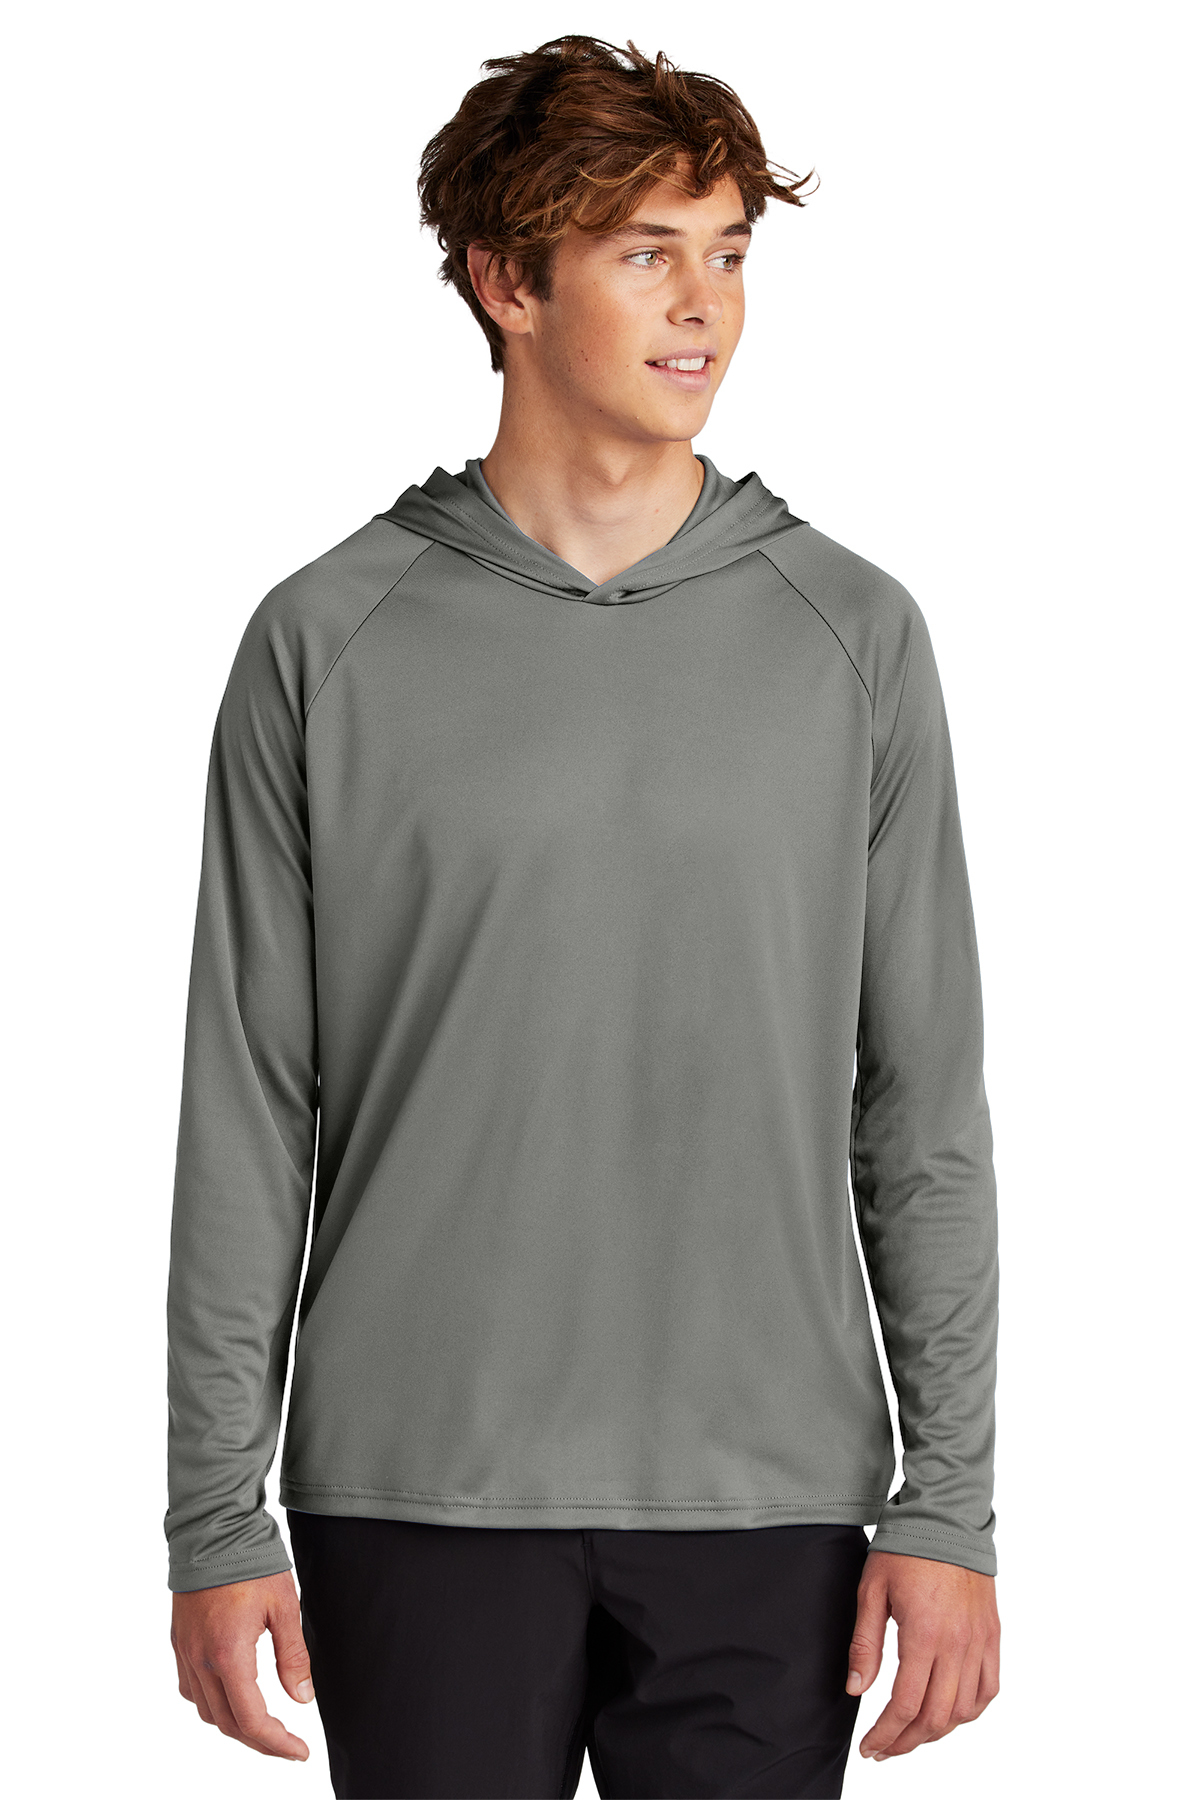 Mahi Performance Long Sleeve Hooded Shirt for Men's in Gray, Size Small from Realtree